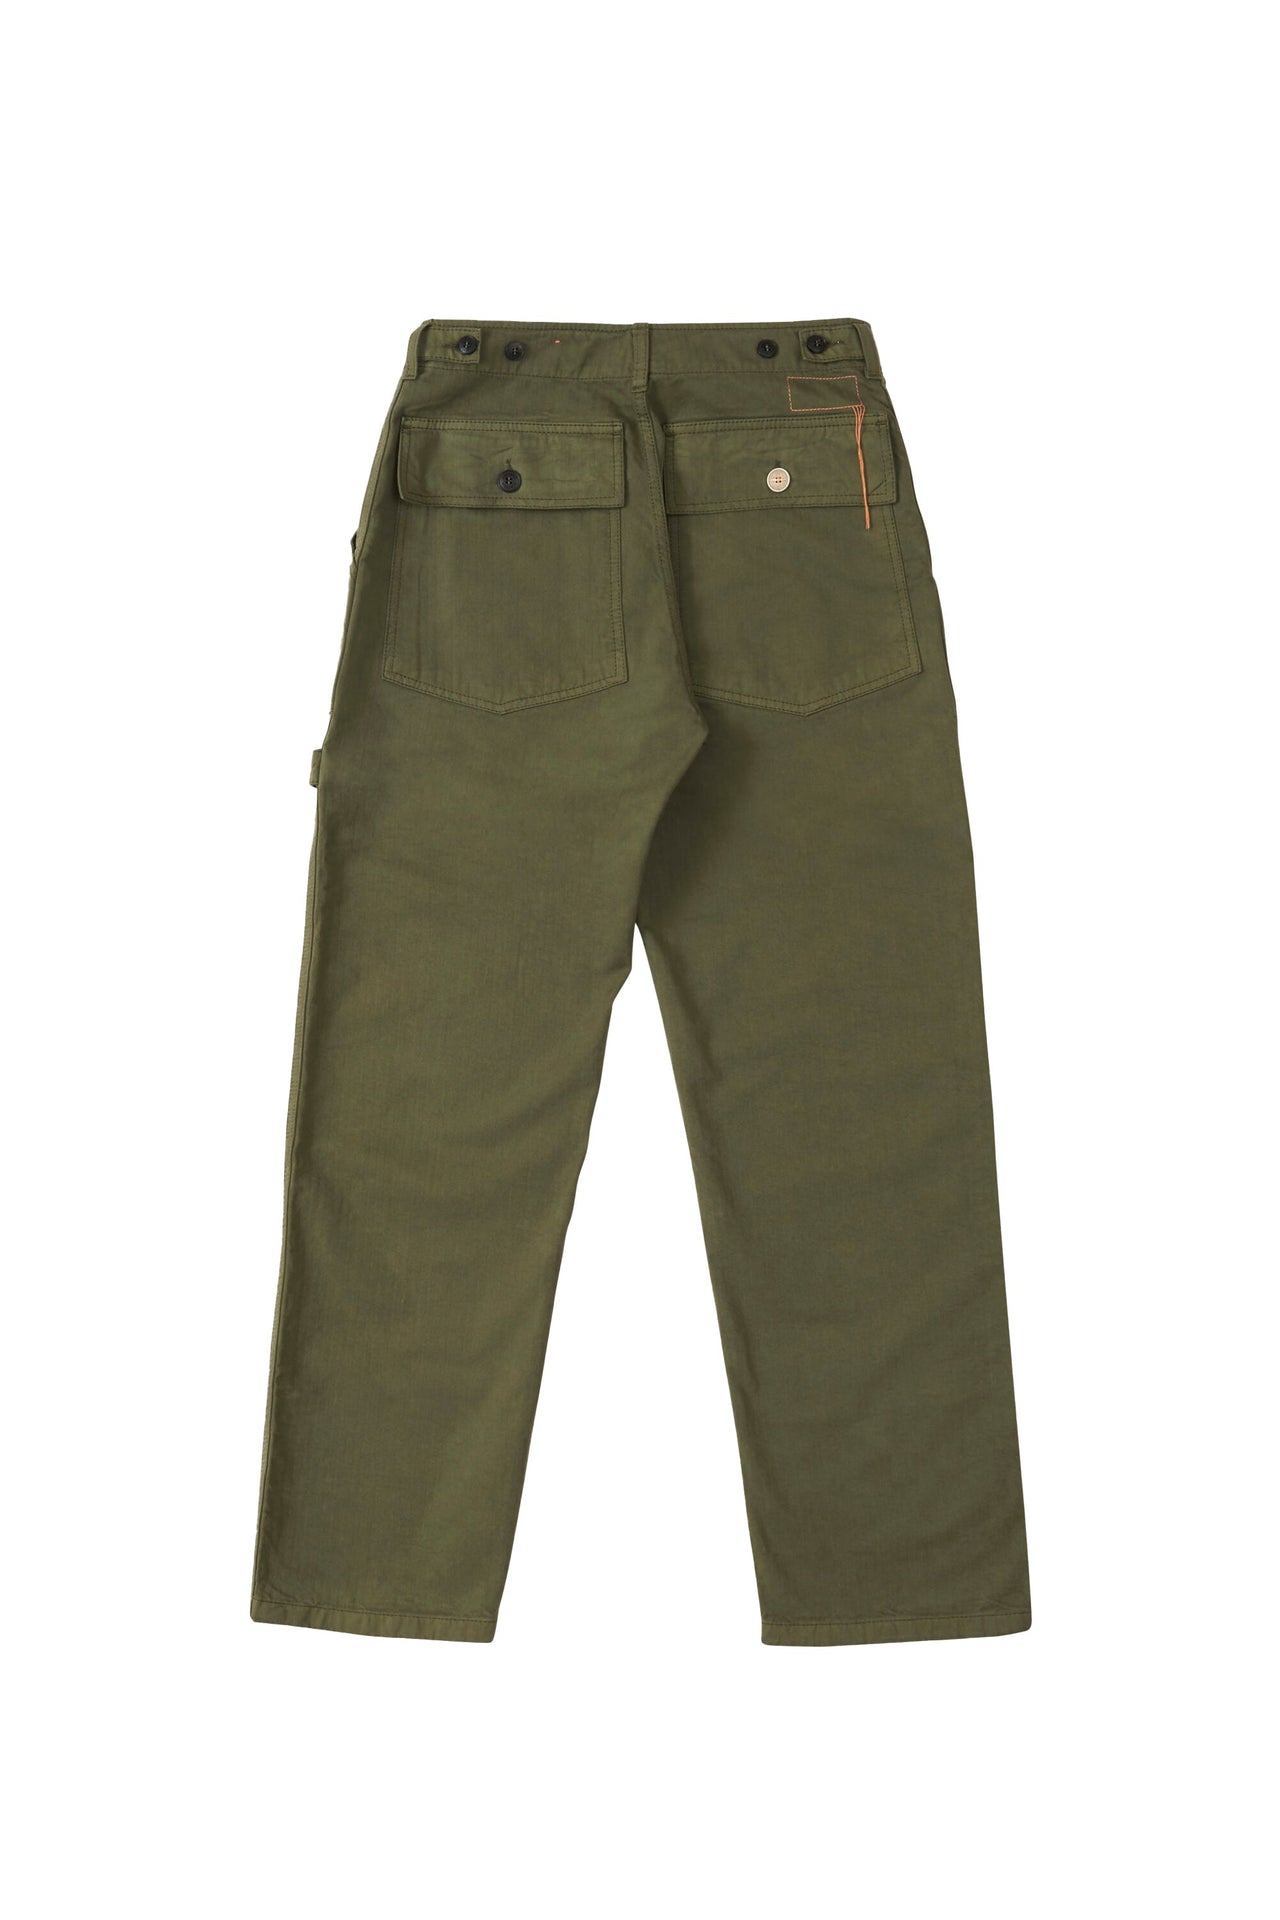 W-JERRY/T Green Pants-Pant-Fortela-Debs Boutique